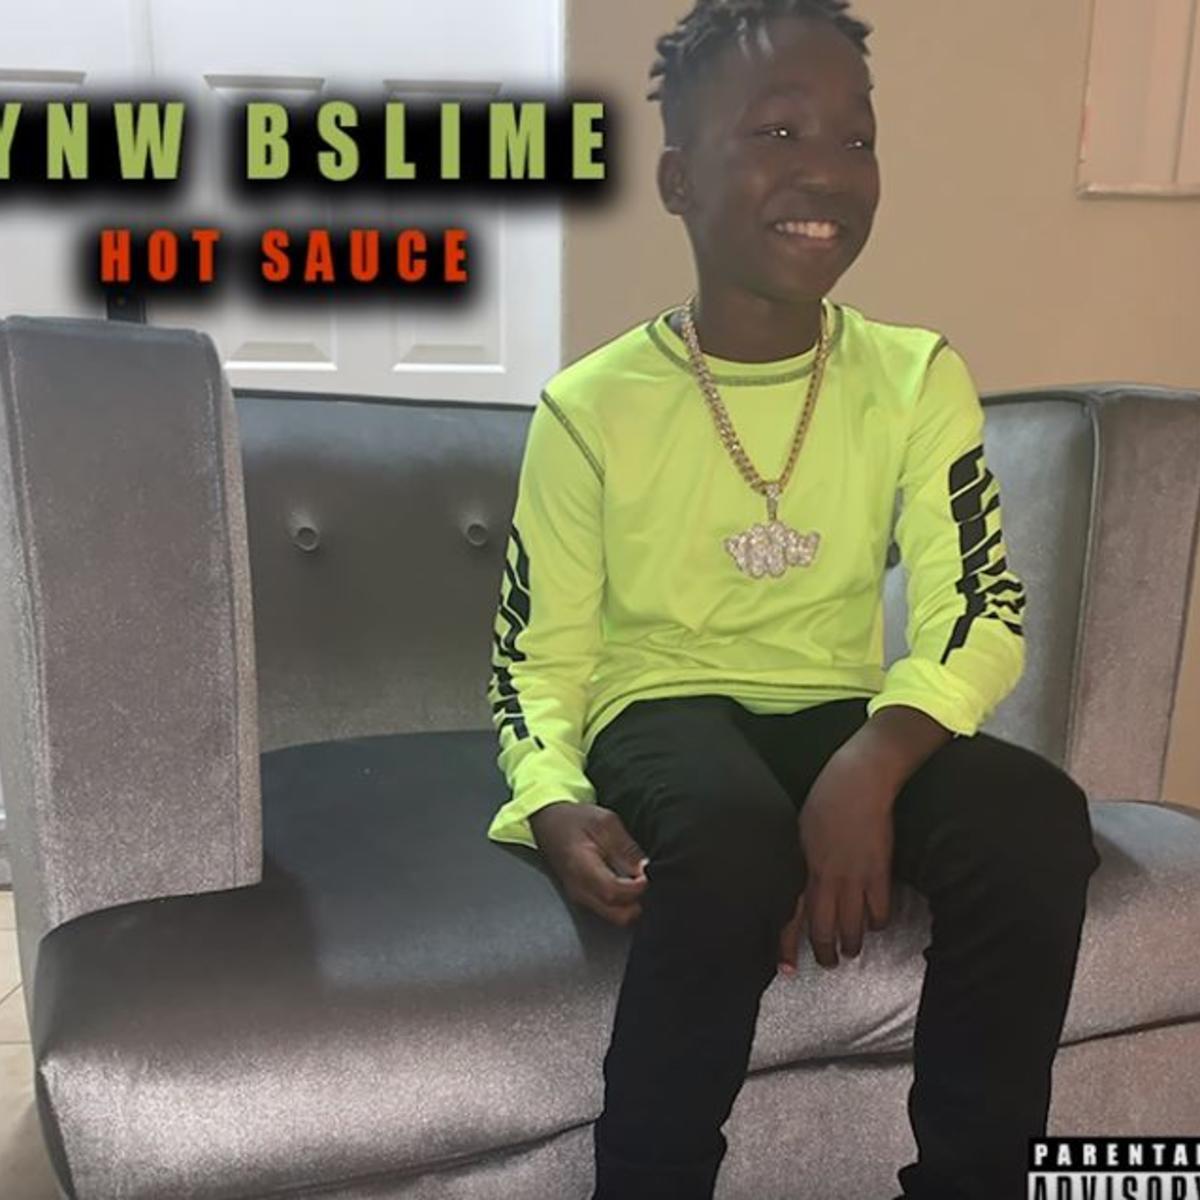 YNW Melly's 12 Year Old Brother YNW BSlime Drops Hot Sauce Single